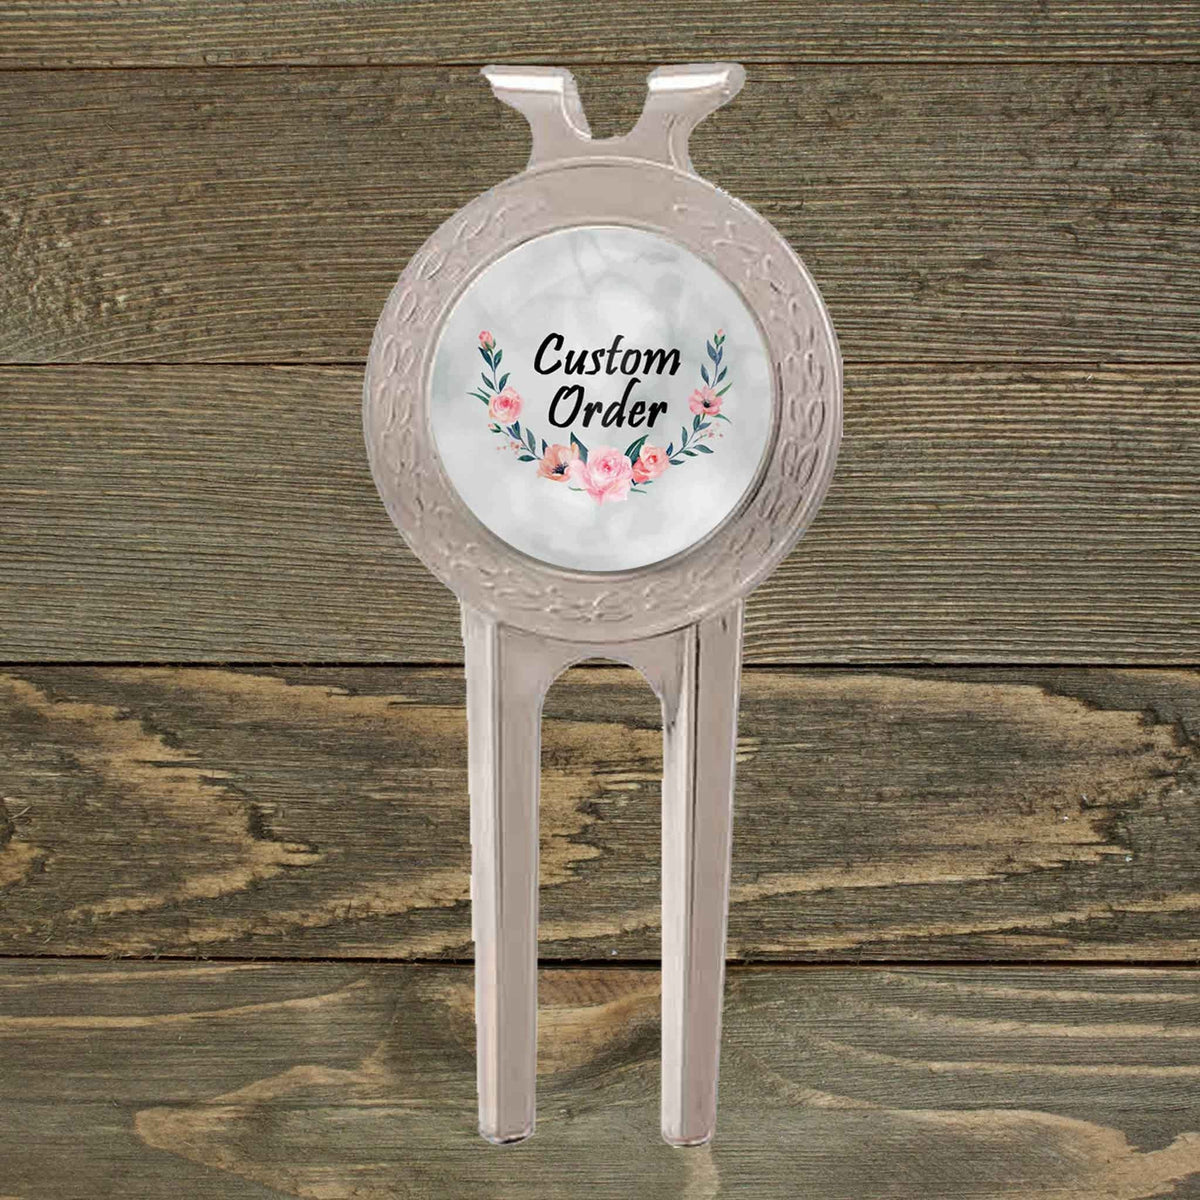 Personalized Divot Repair Tool | Golf Accessories | Golf Gifts | Custom Order